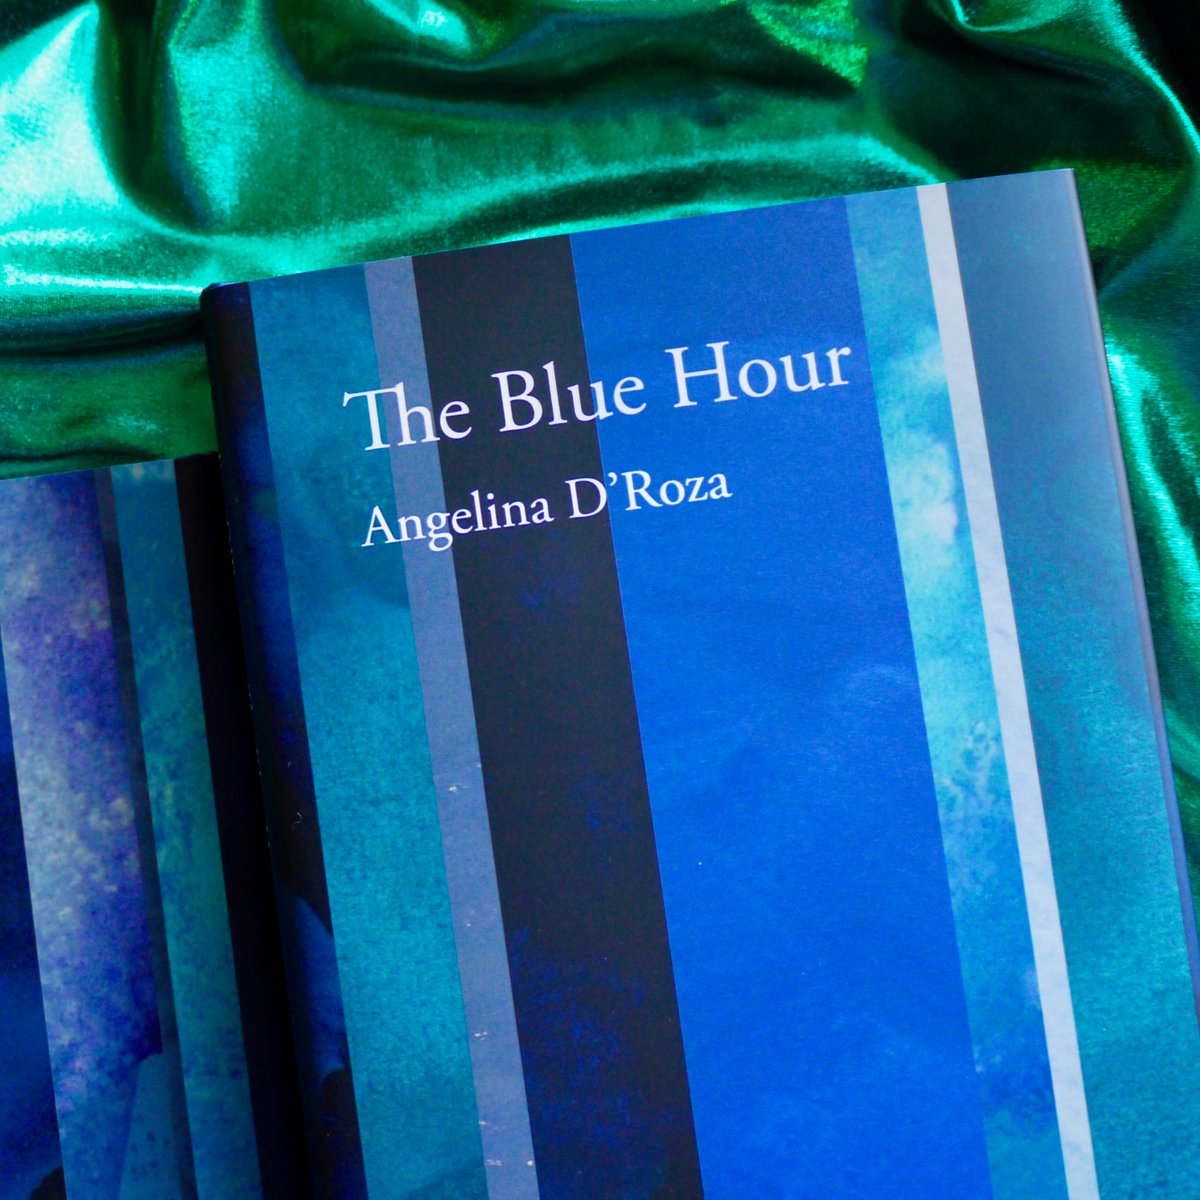 'All this time I’ve been waiting for dawn when I already had what I needed.' New Featured Poem on the Longbarrow site: 'Correspondences: The Lark Ascending' by @AngelinaDRoza (from her new collection 'The Blue Hour') longbarrowpress.com/featured-poem/